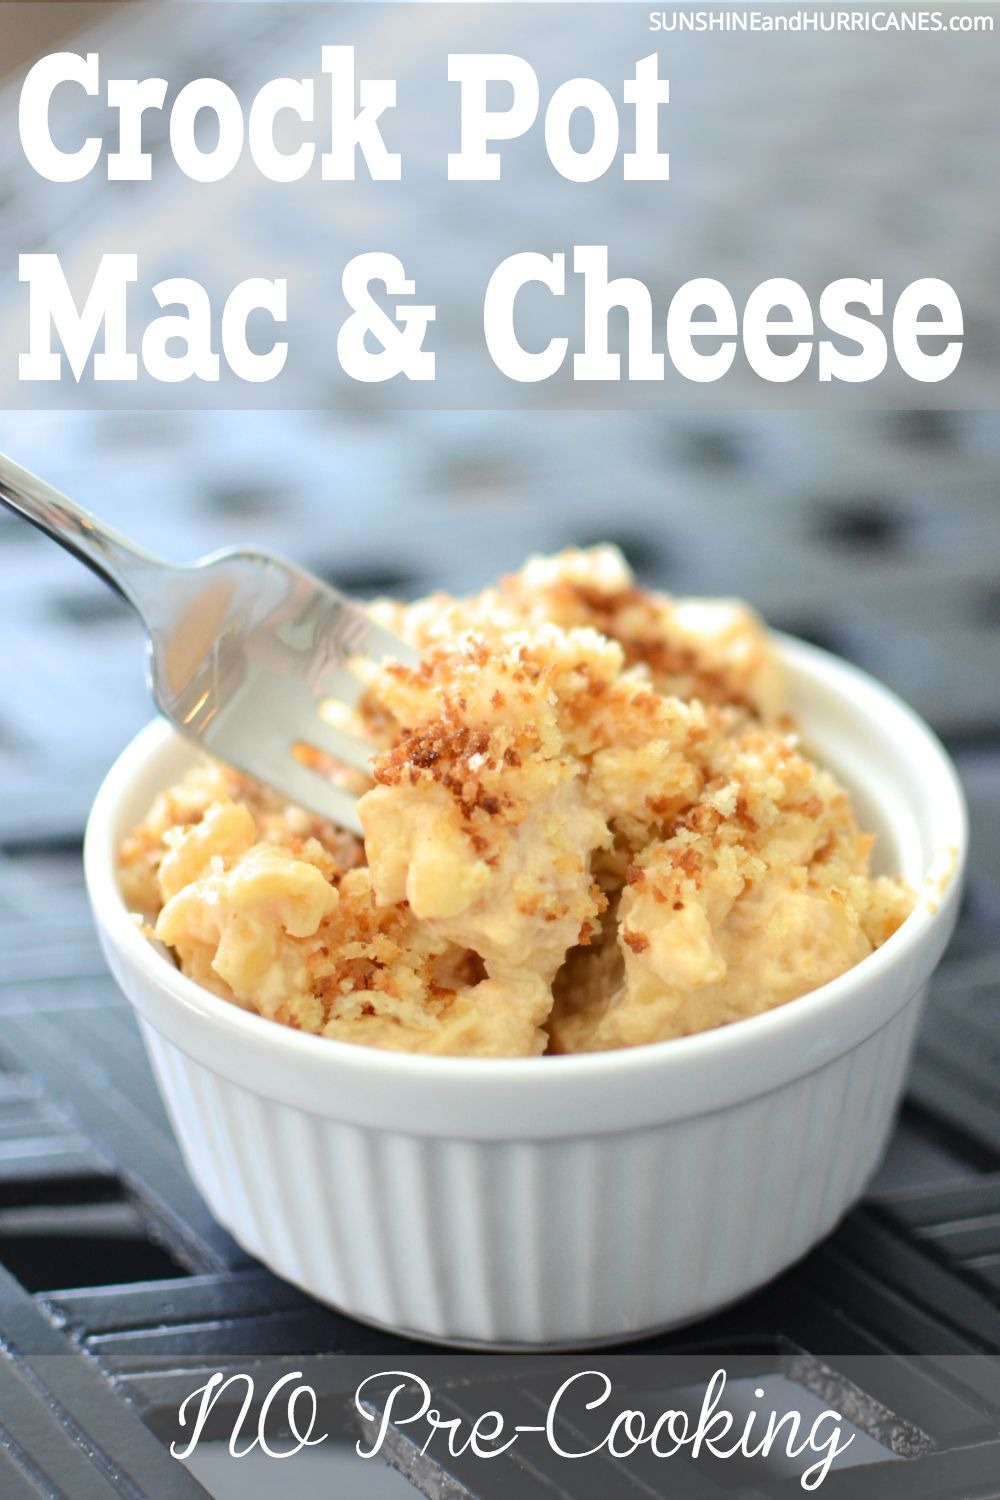 Looking for a Crock Pot Mac and Cheese Recipe that doesn't require you to pre-cook the noodles AND actually tastes good?! I took on the challenge and finally came up with recipe that works, tastes good and is perfect for an easy family dinner. Crock Pot Mac and Cheese. SunshineandHurricanes.com